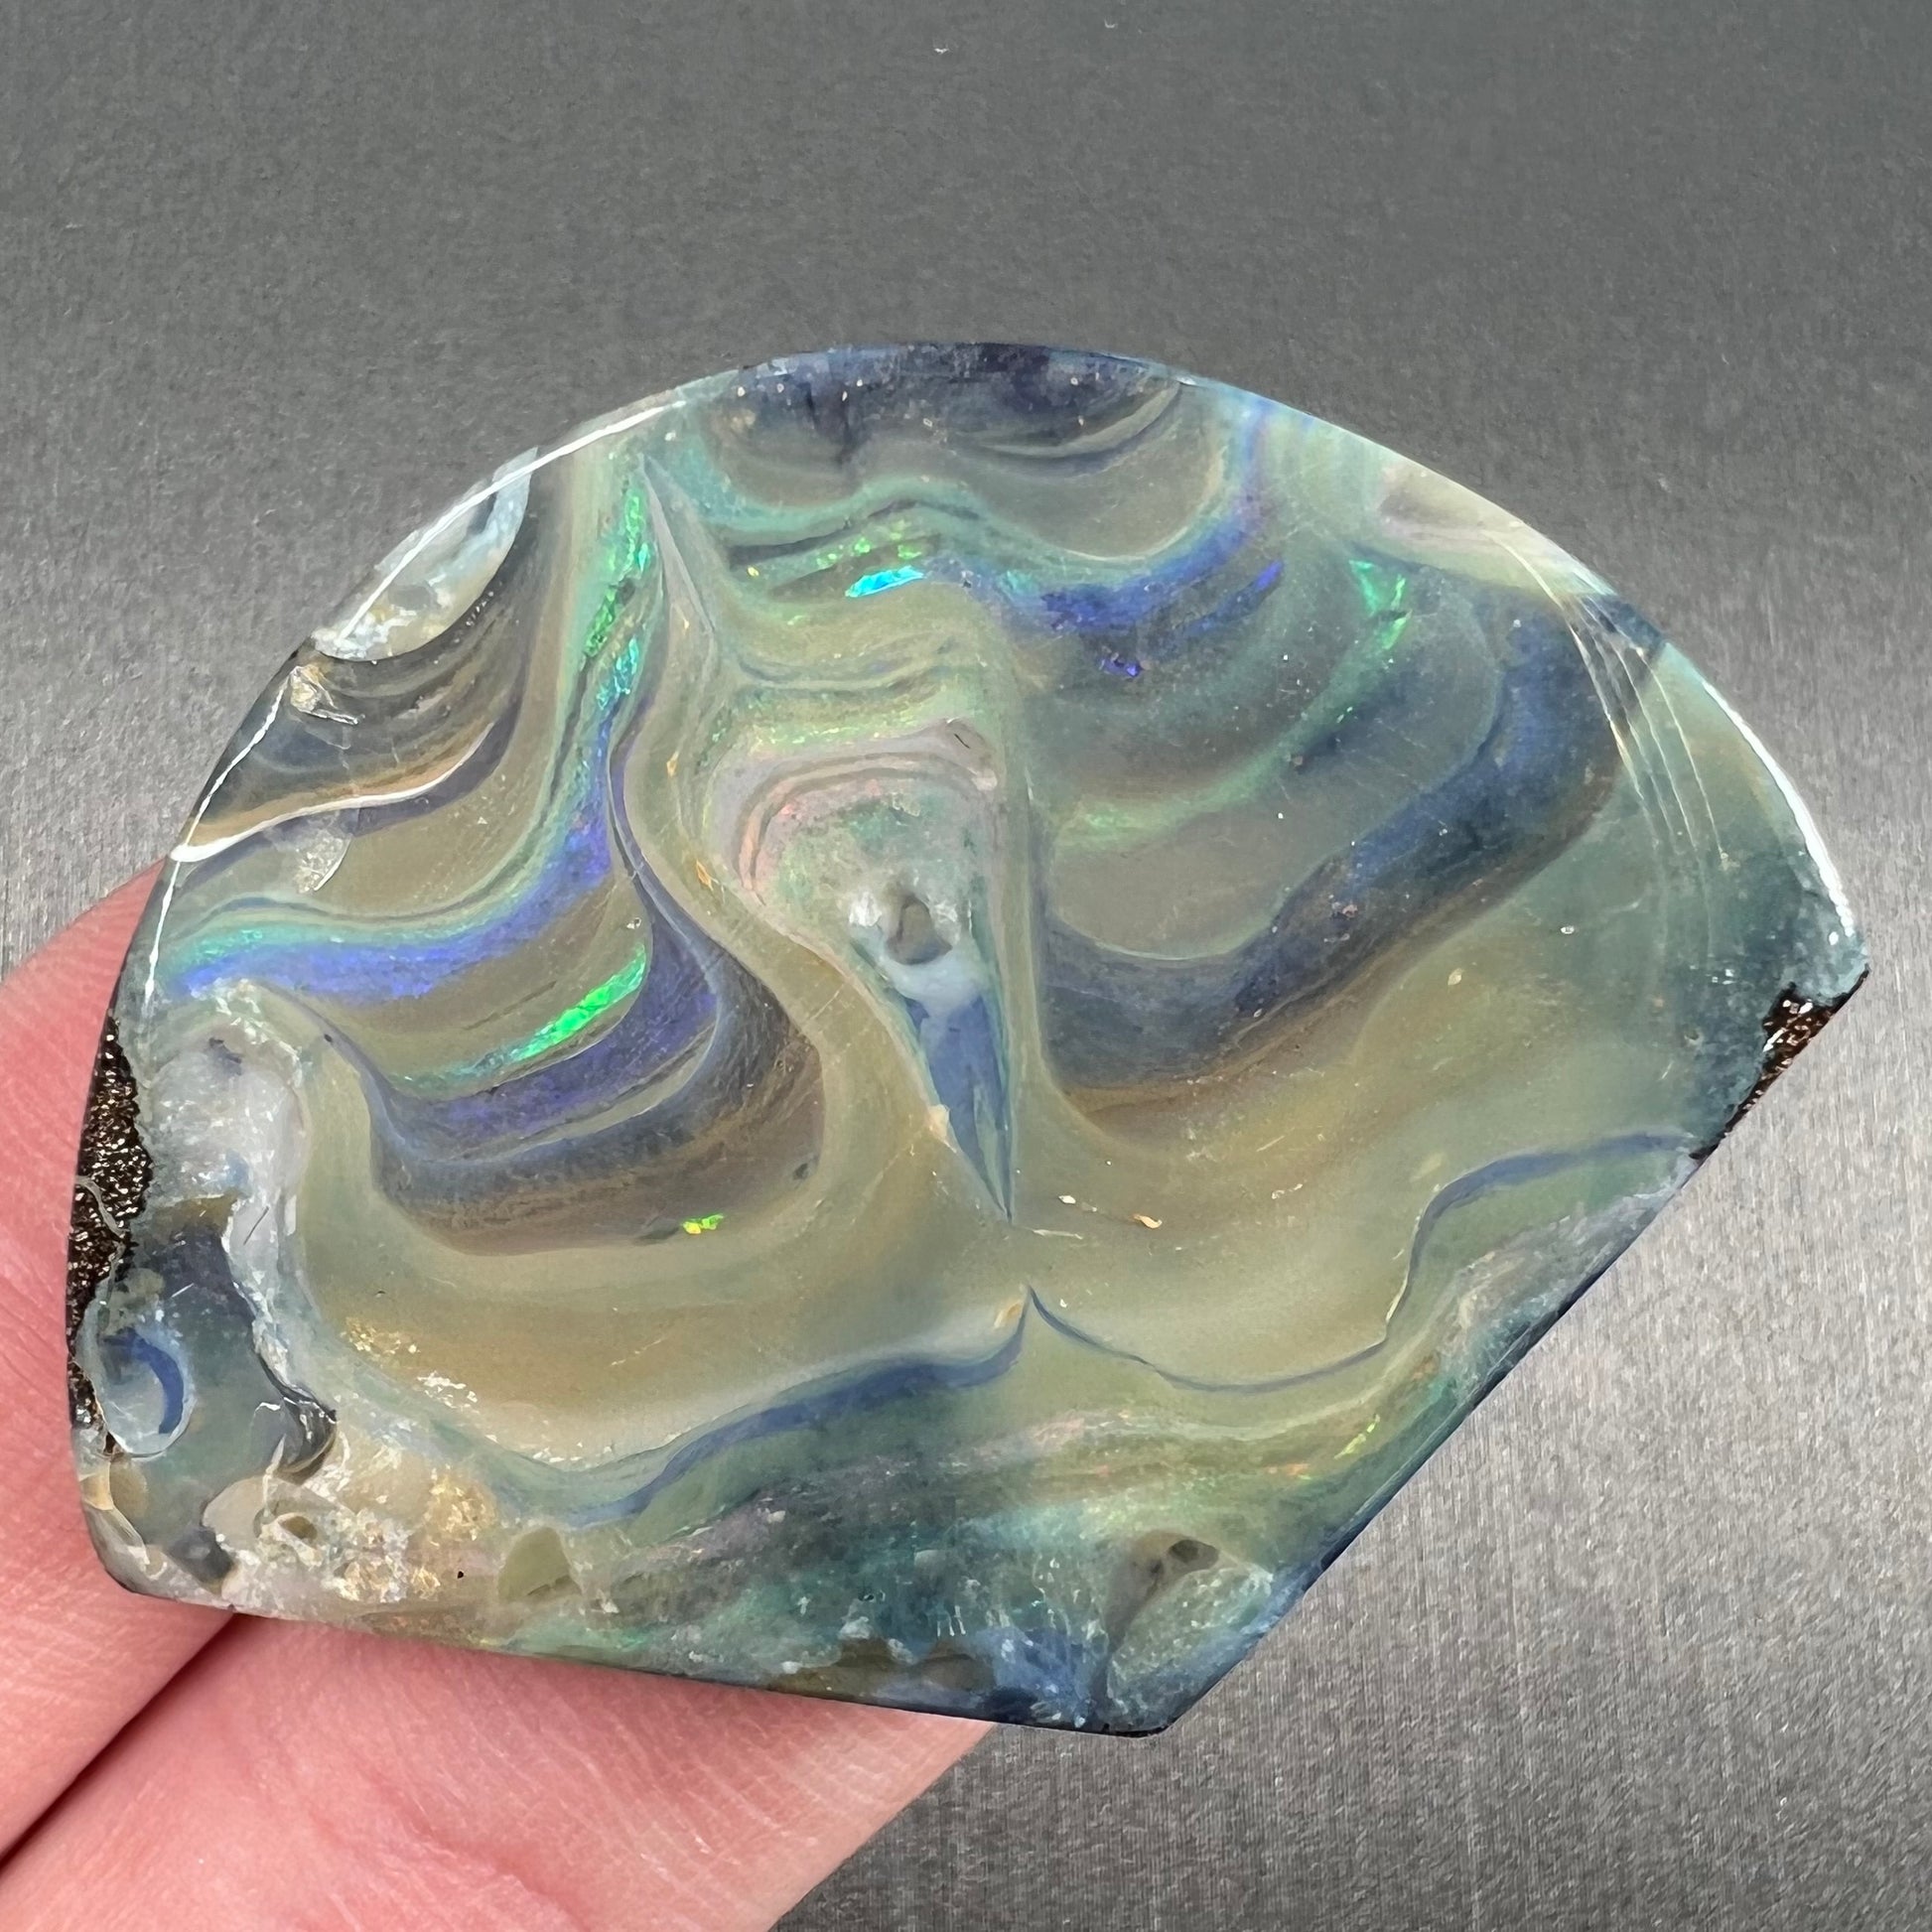 A polished, loose boulder opal stone from Queensland, Australia.  Fire colors are green, blue, purple, and salmon.